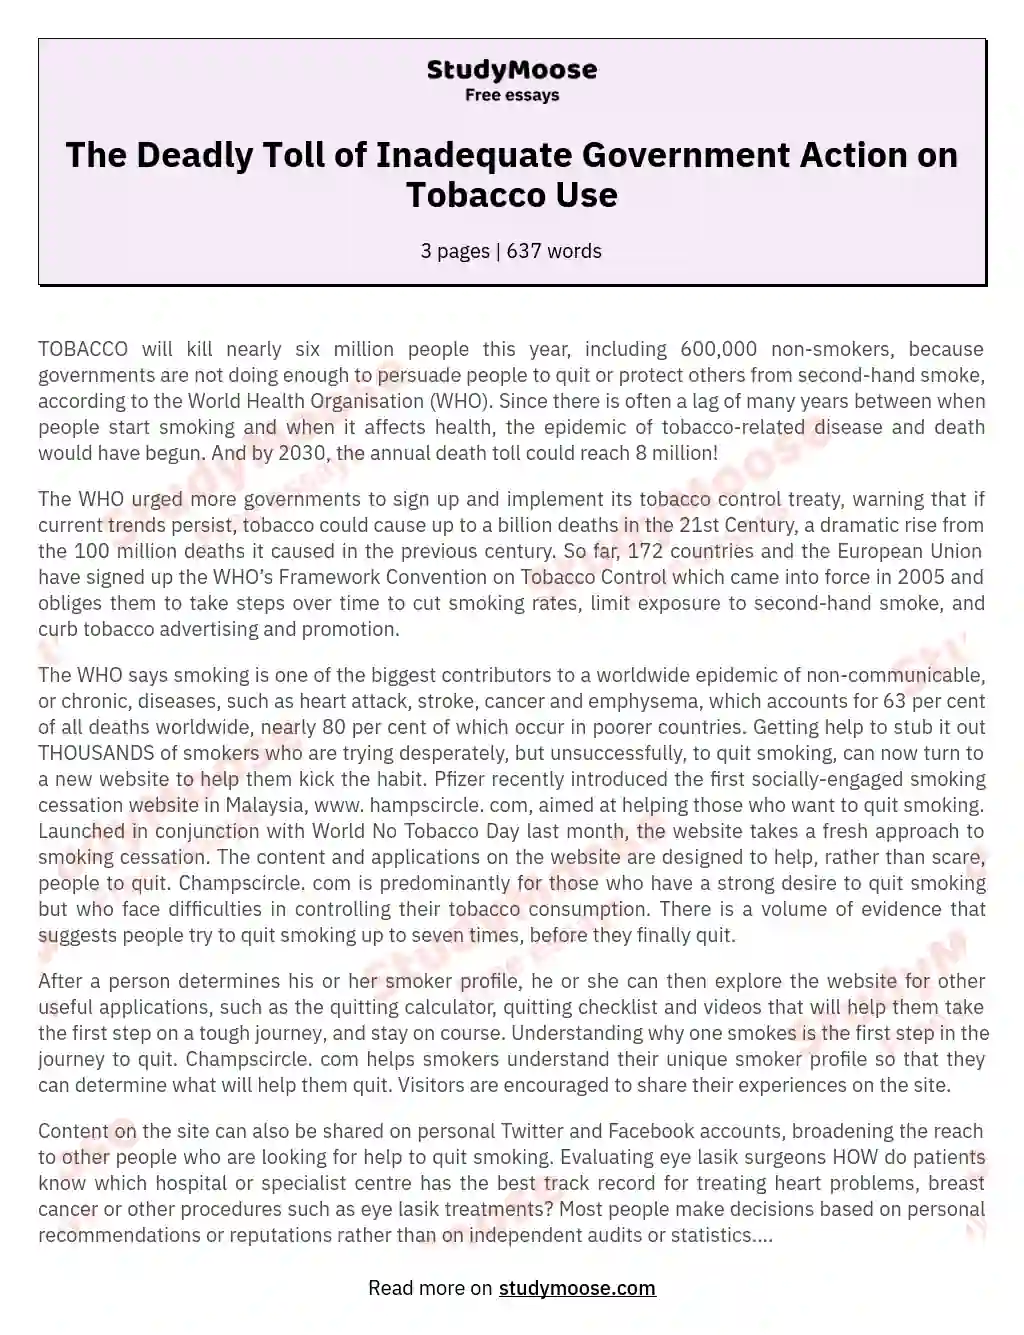 The Deadly Toll of Inadequate Government Action on Tobacco Use essay